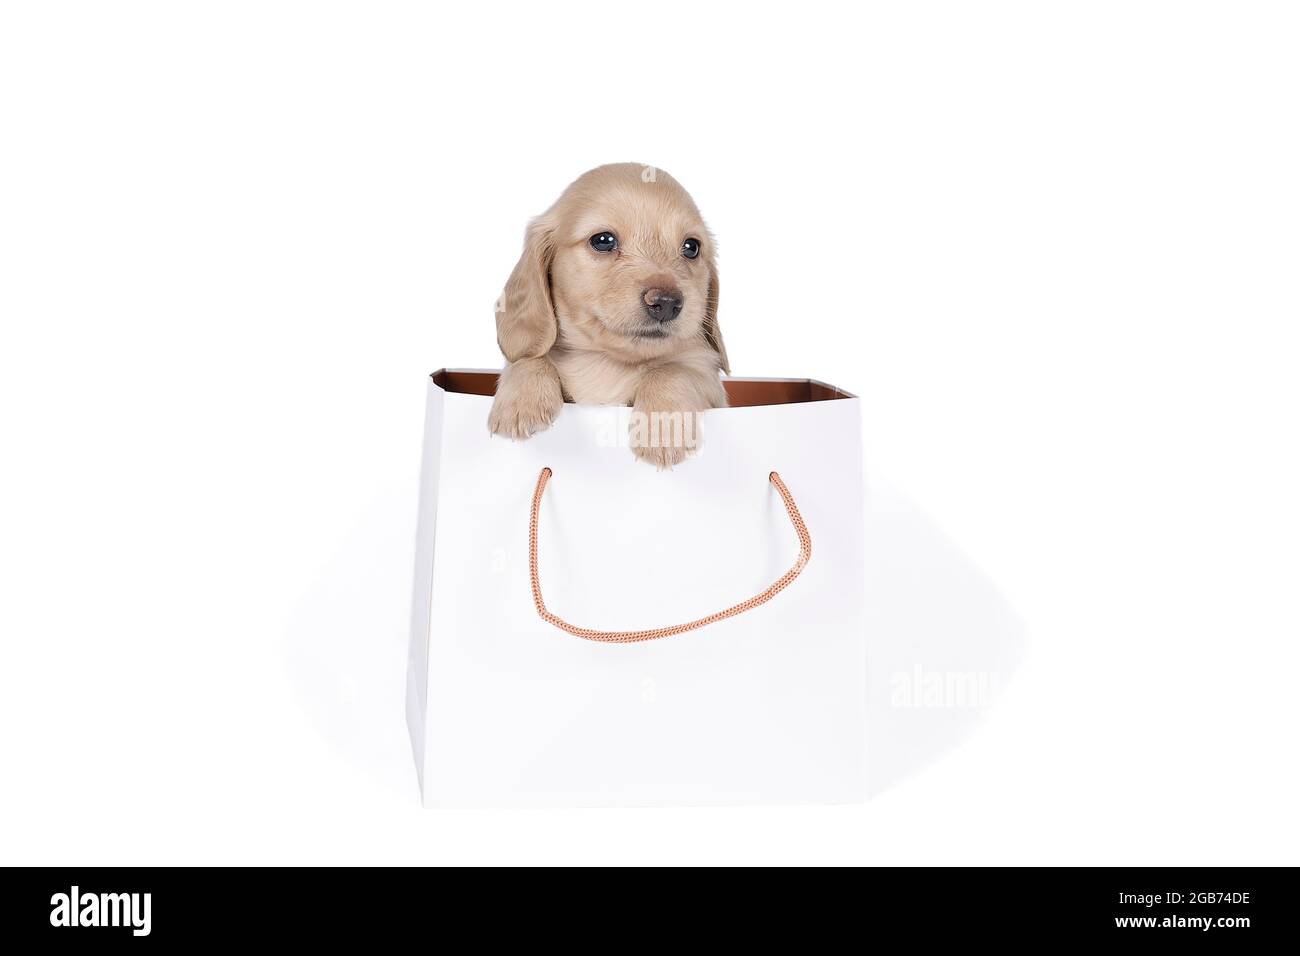 One  blonde longhaired  Dachshund dog pup in a shoppingbag isolated on a white background Stock Photo